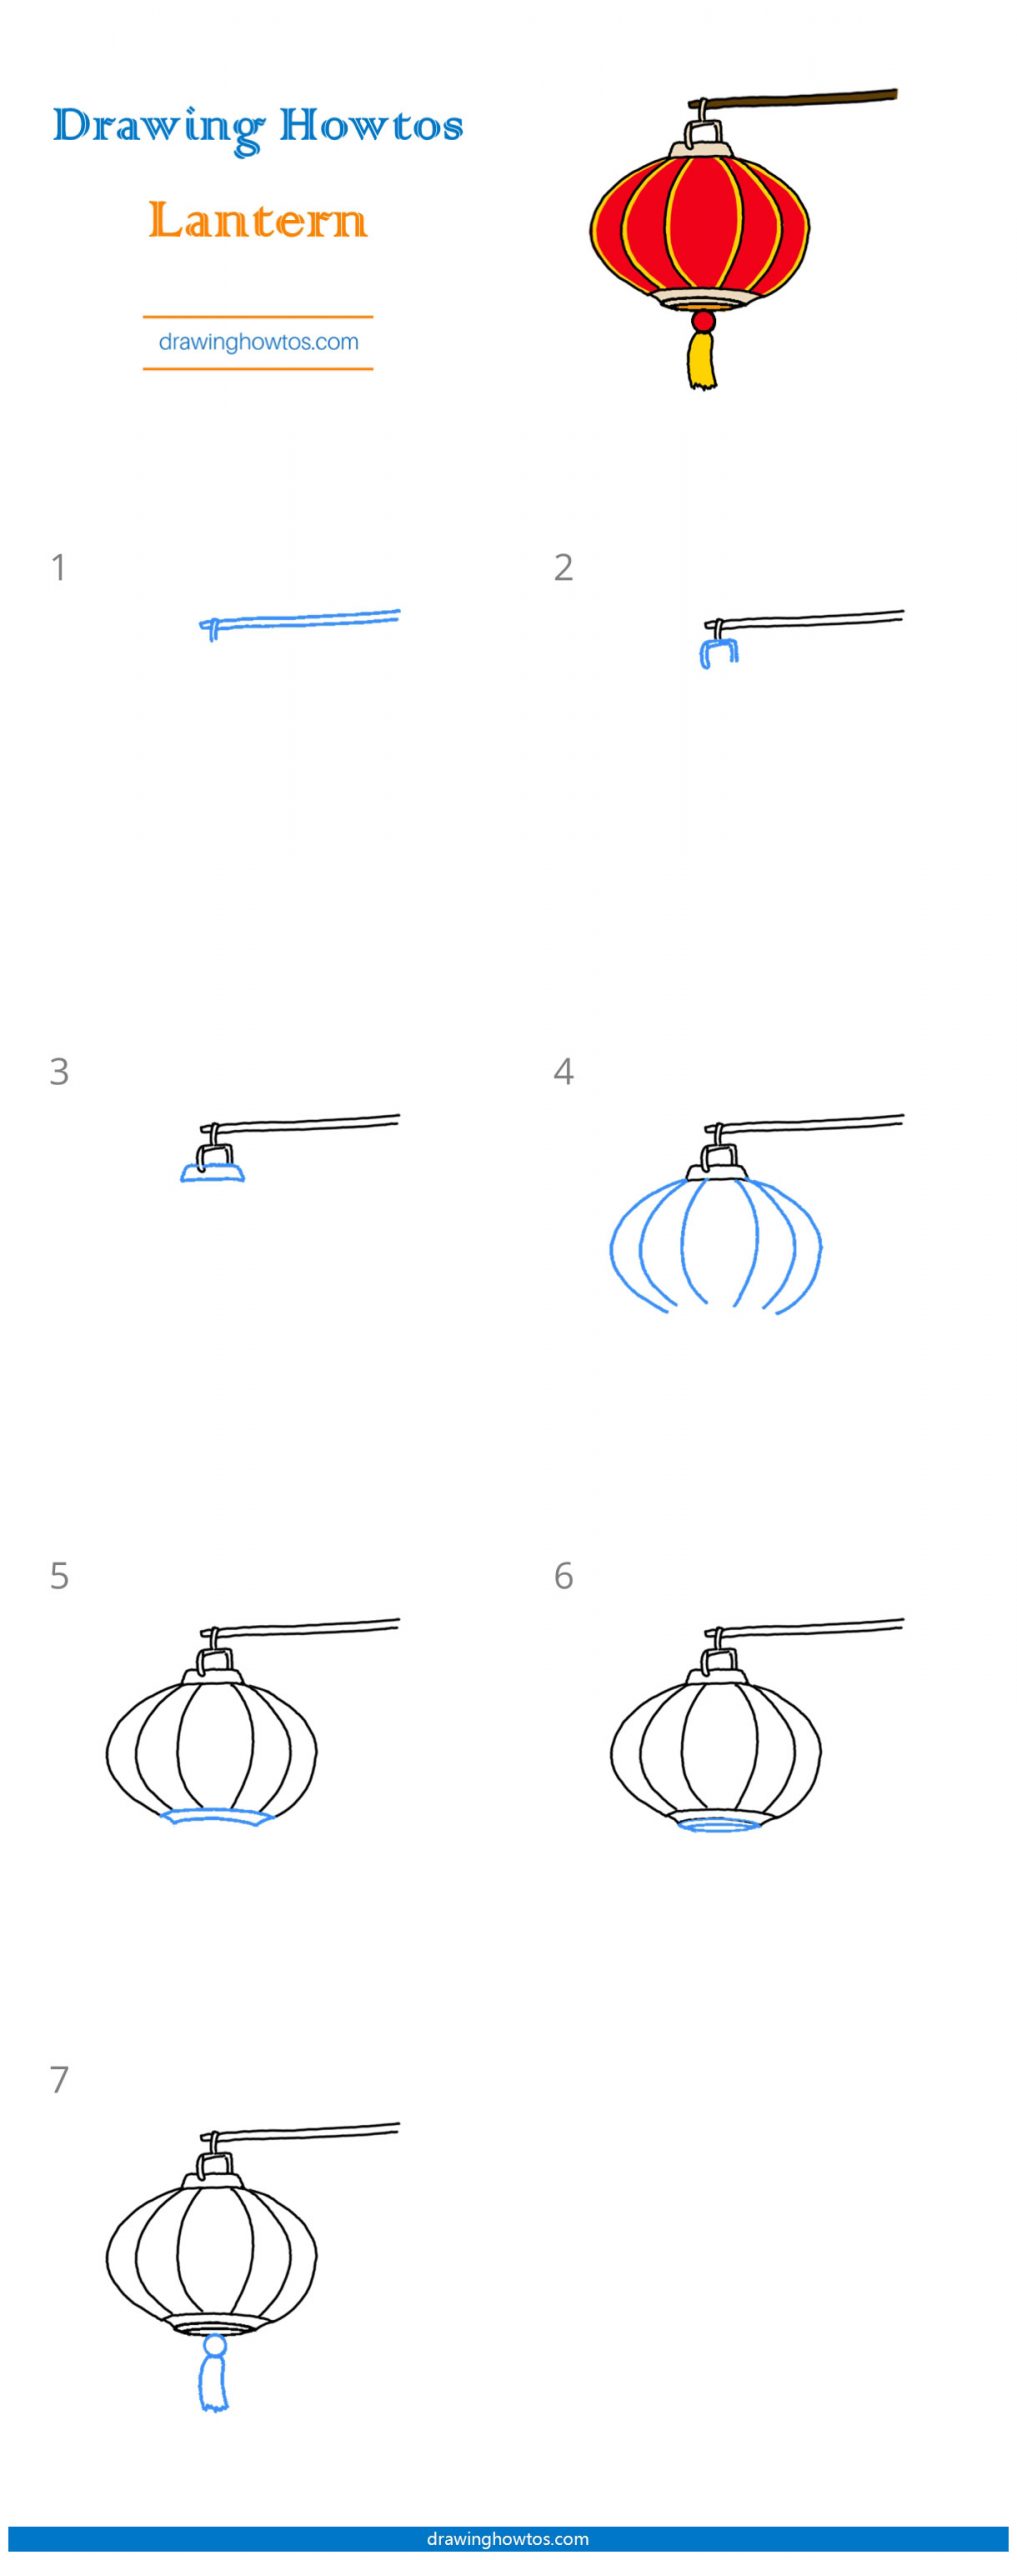 How to Draw a Lantern Step by Step